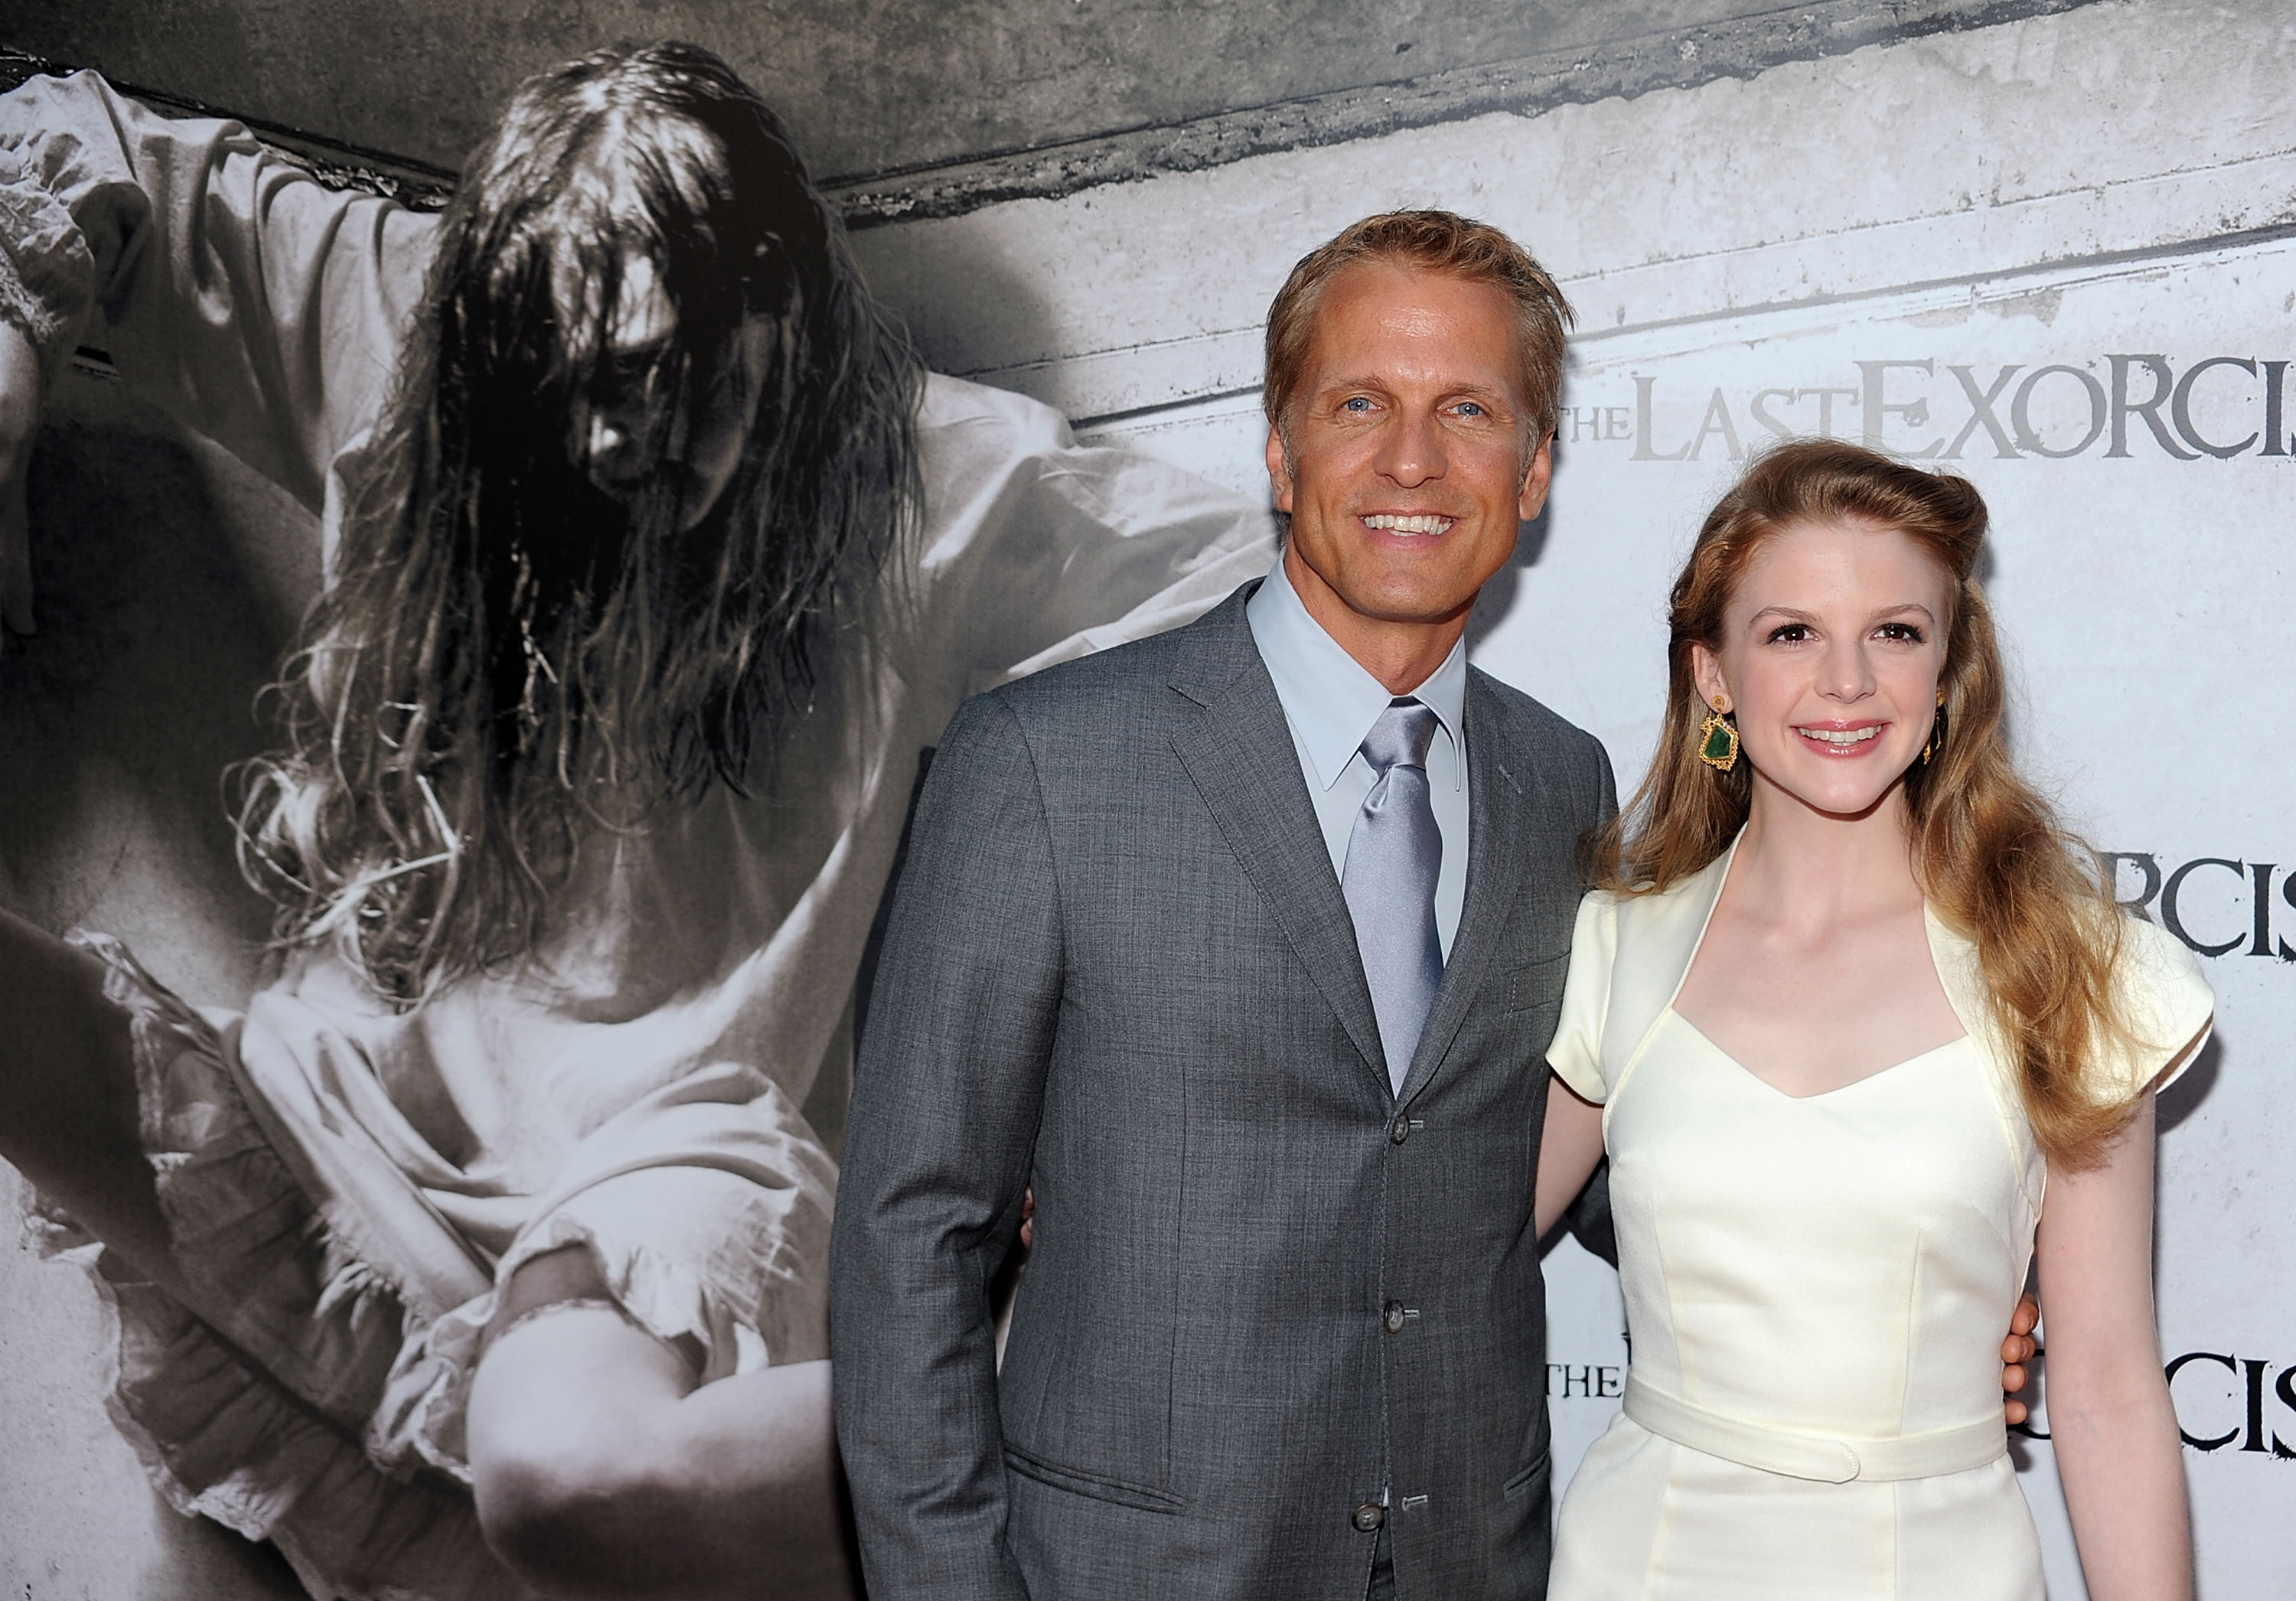 'Better Call Saul' star Patrick Fabian puts his arm around 'Last Exorcism' horror movie co-star Ashley Bell